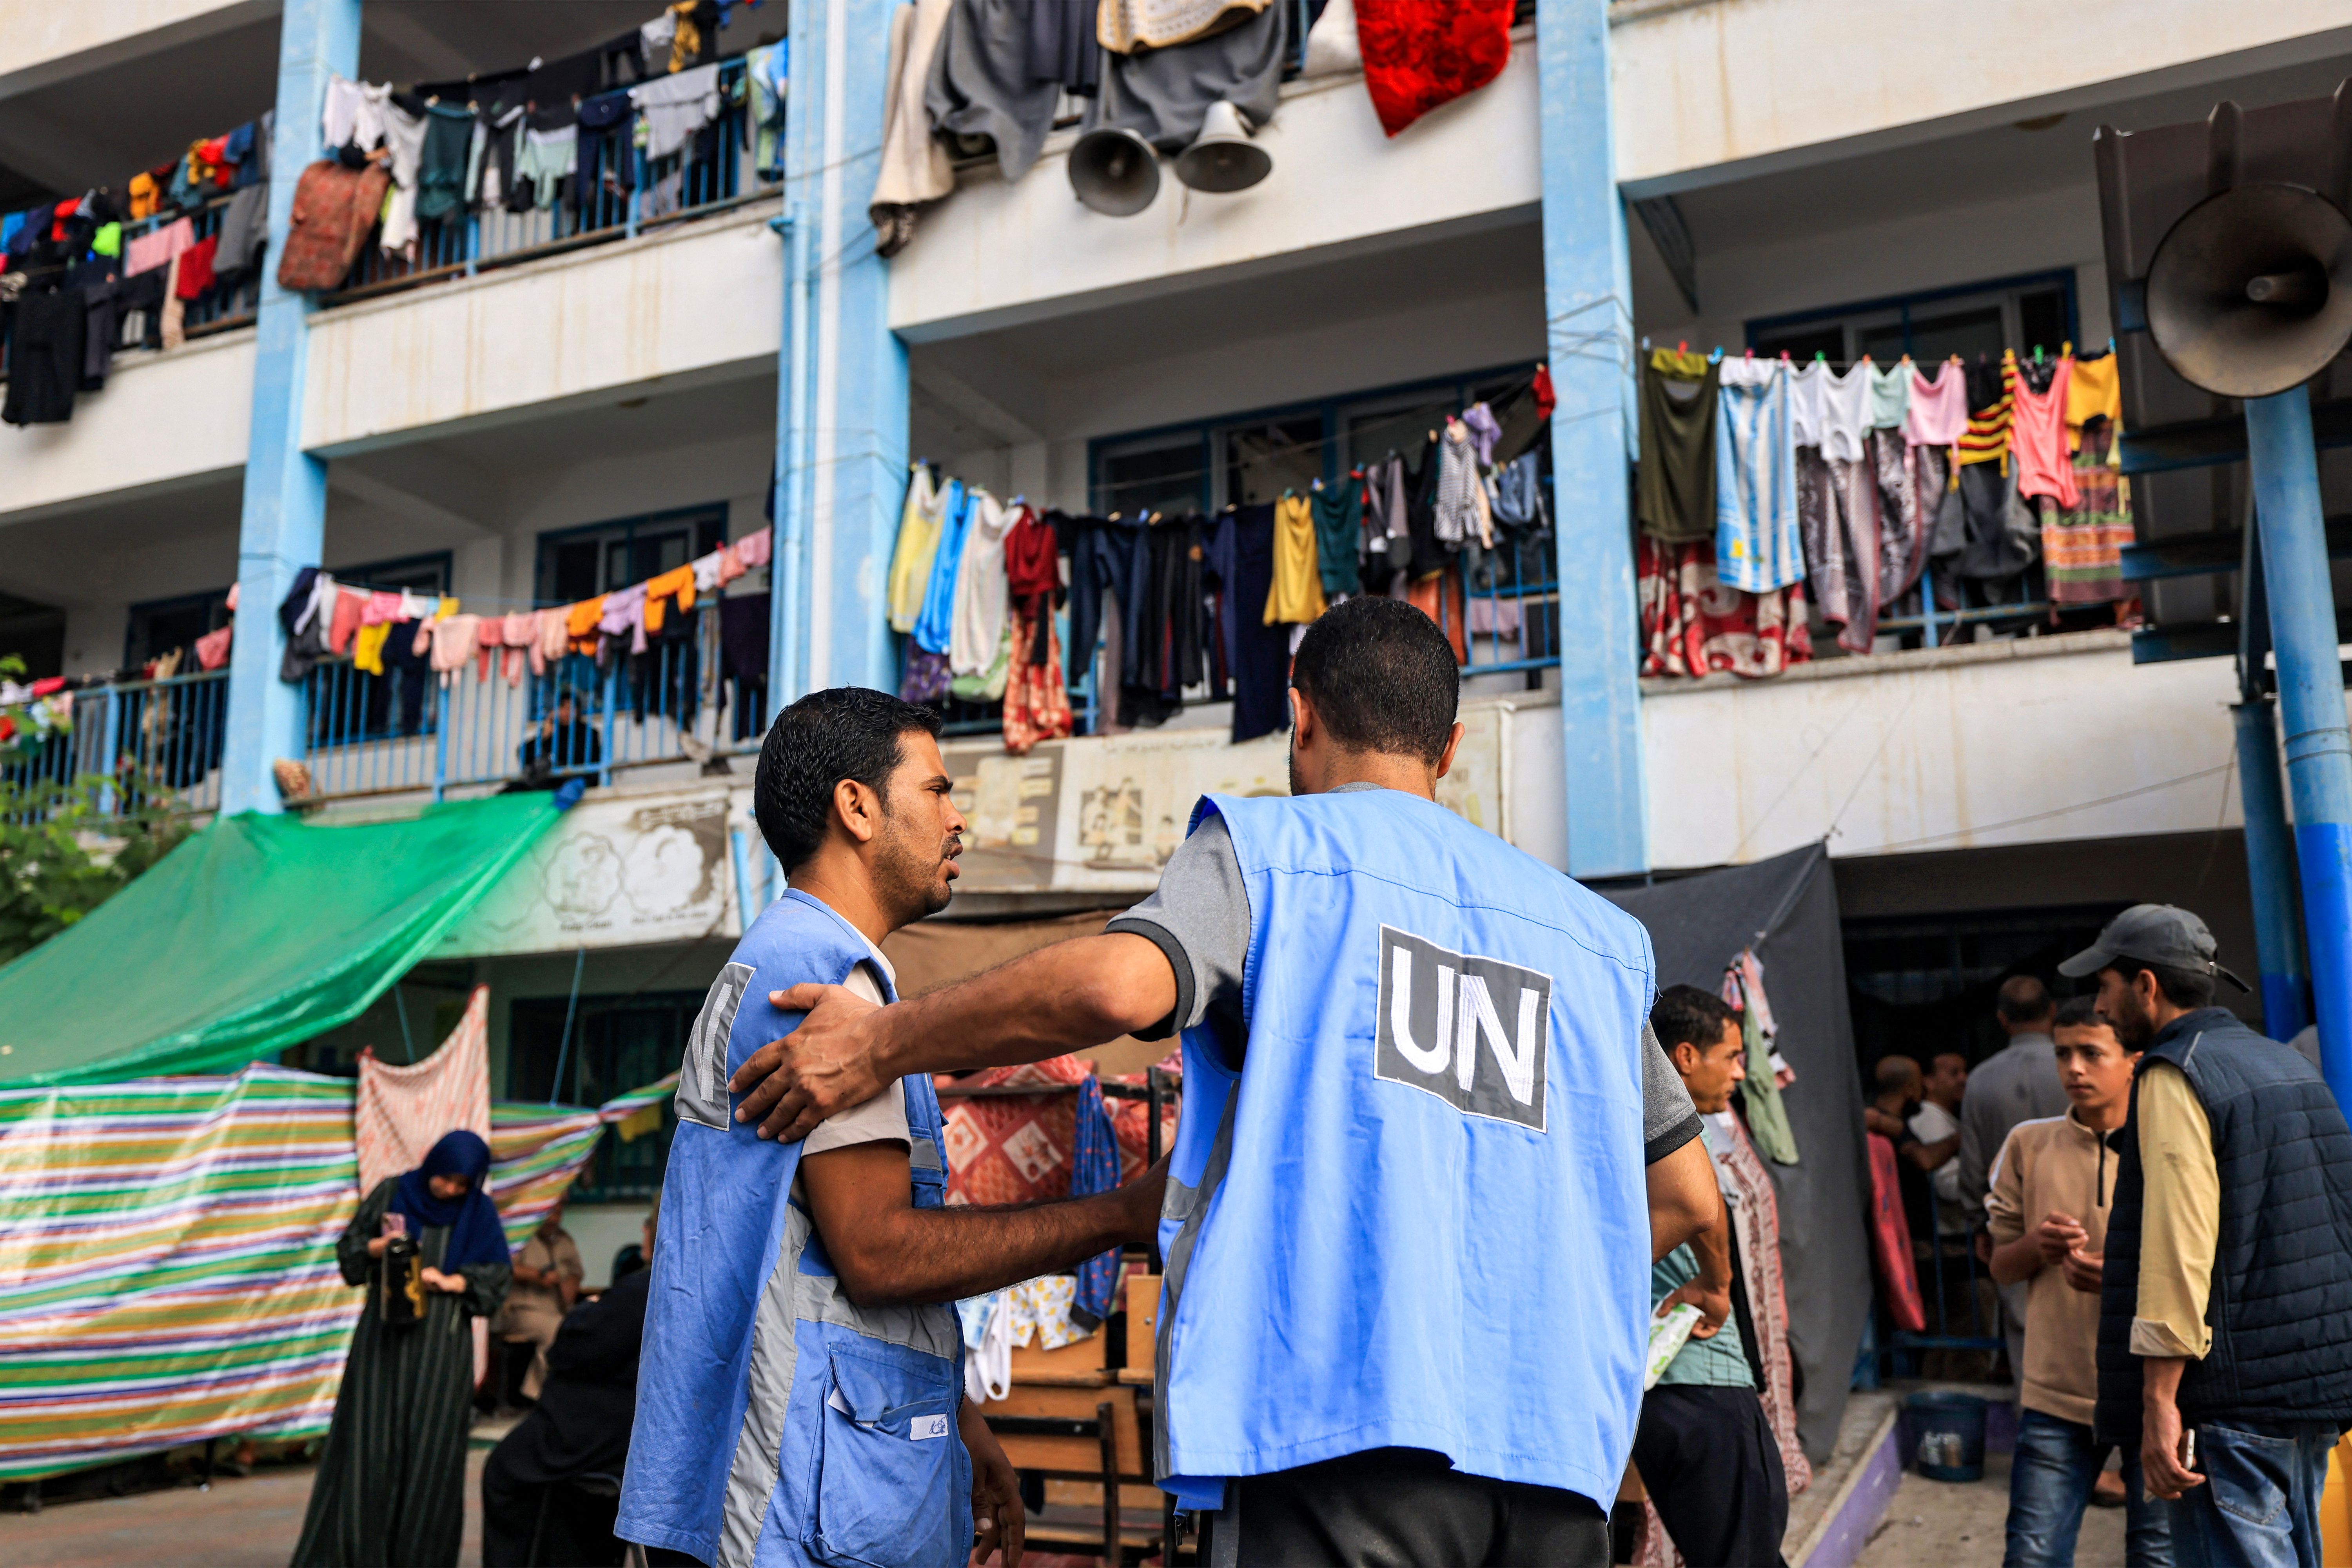 Workers of the United Nations Relief and Works Agency for Palestine Refugees (UNRWA) agency talk together in the playground of an UNRWA-run school that has been converted into a shelter for displaced Palestinians in Khan Younis, southern Gaza, on October 25.